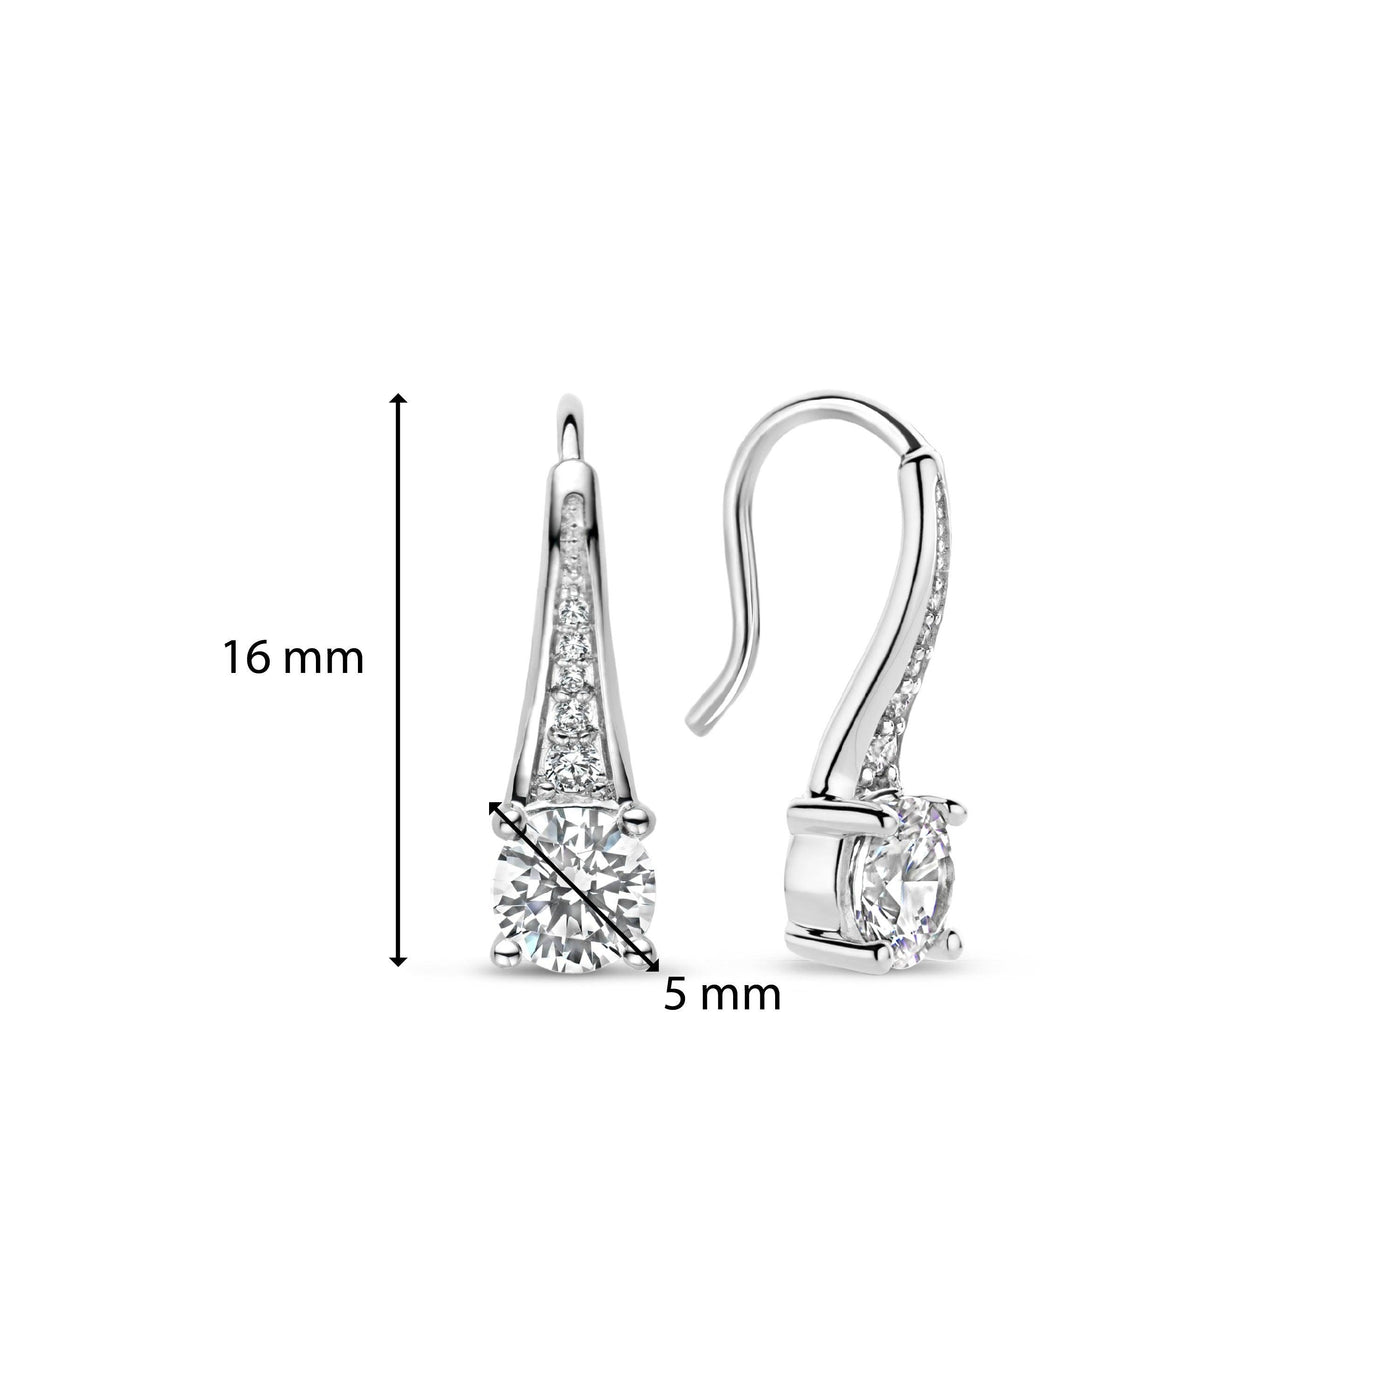 Ti Sento Sterling Silver and Cubic Zirconia Drop Earrings - Rococo Jewellery